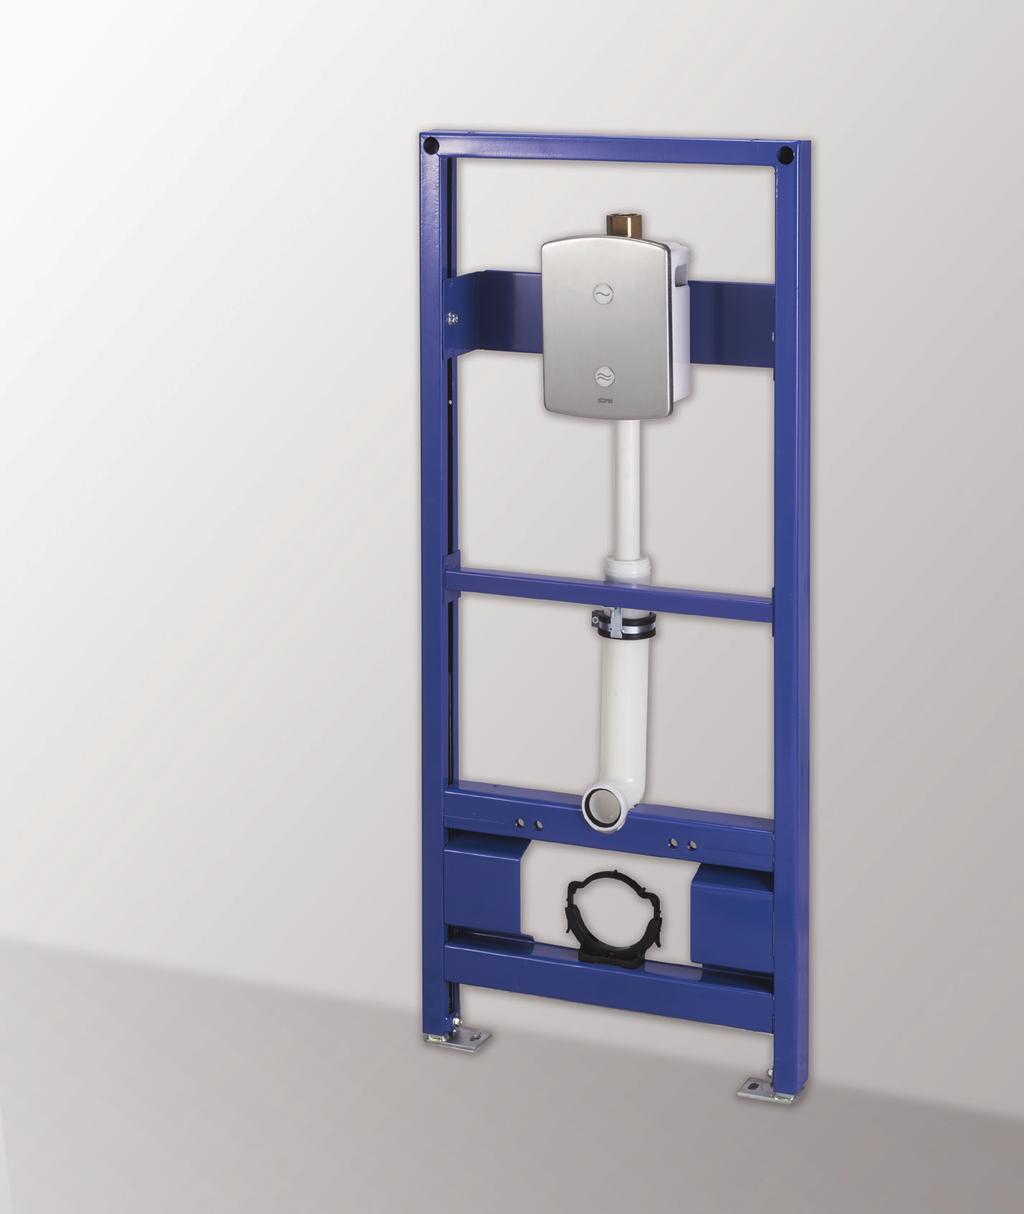 W.C. Frame sets Iron mounting frame set. Galvanized steel iron frame system for wall hang toilets. Delivered ready for installation with flush valve and complete required accessories included.